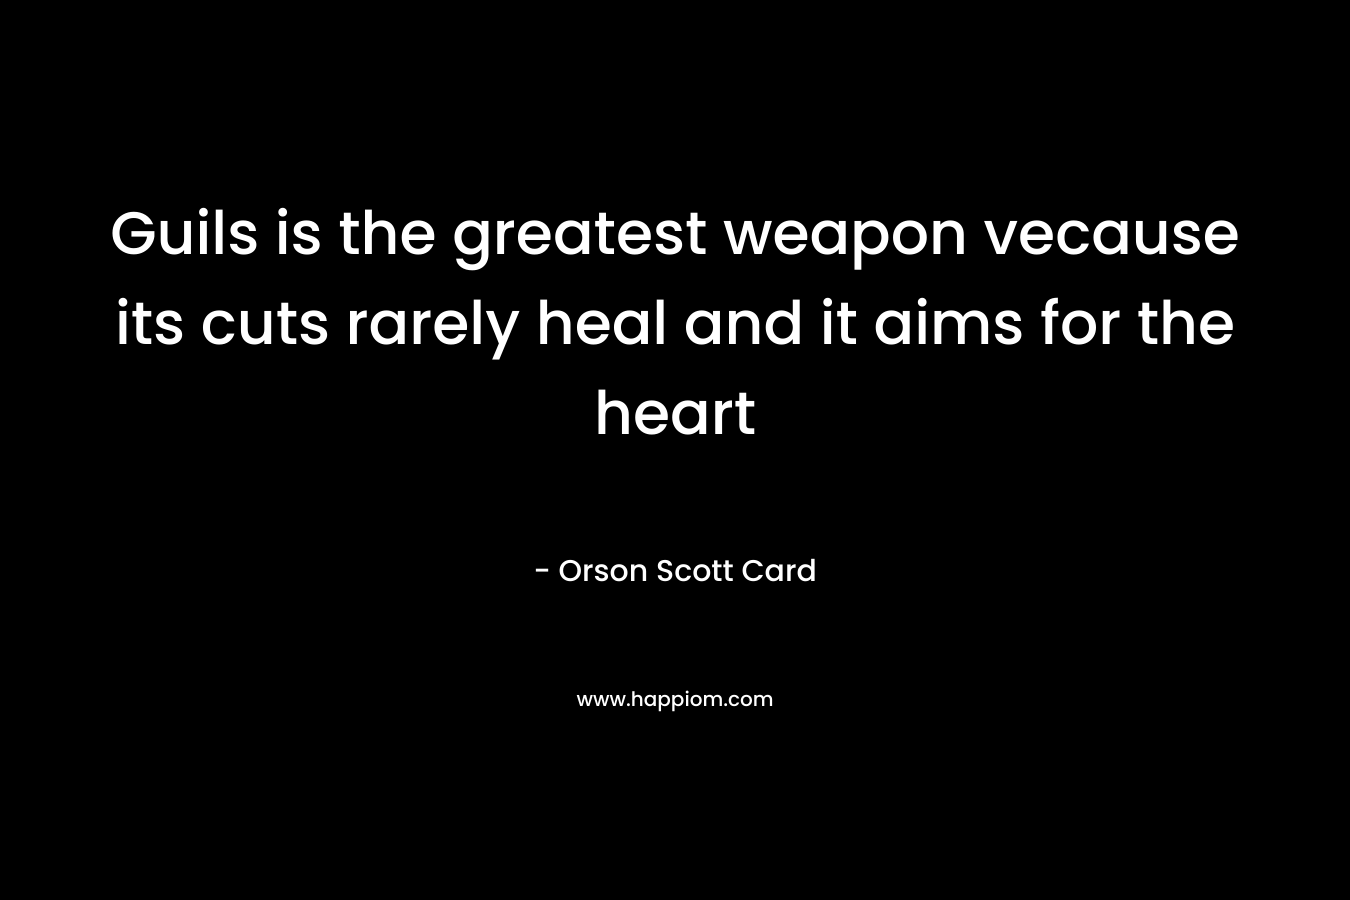 Guils is the greatest weapon vecause its cuts rarely heal and it aims for the heart – Orson Scott Card